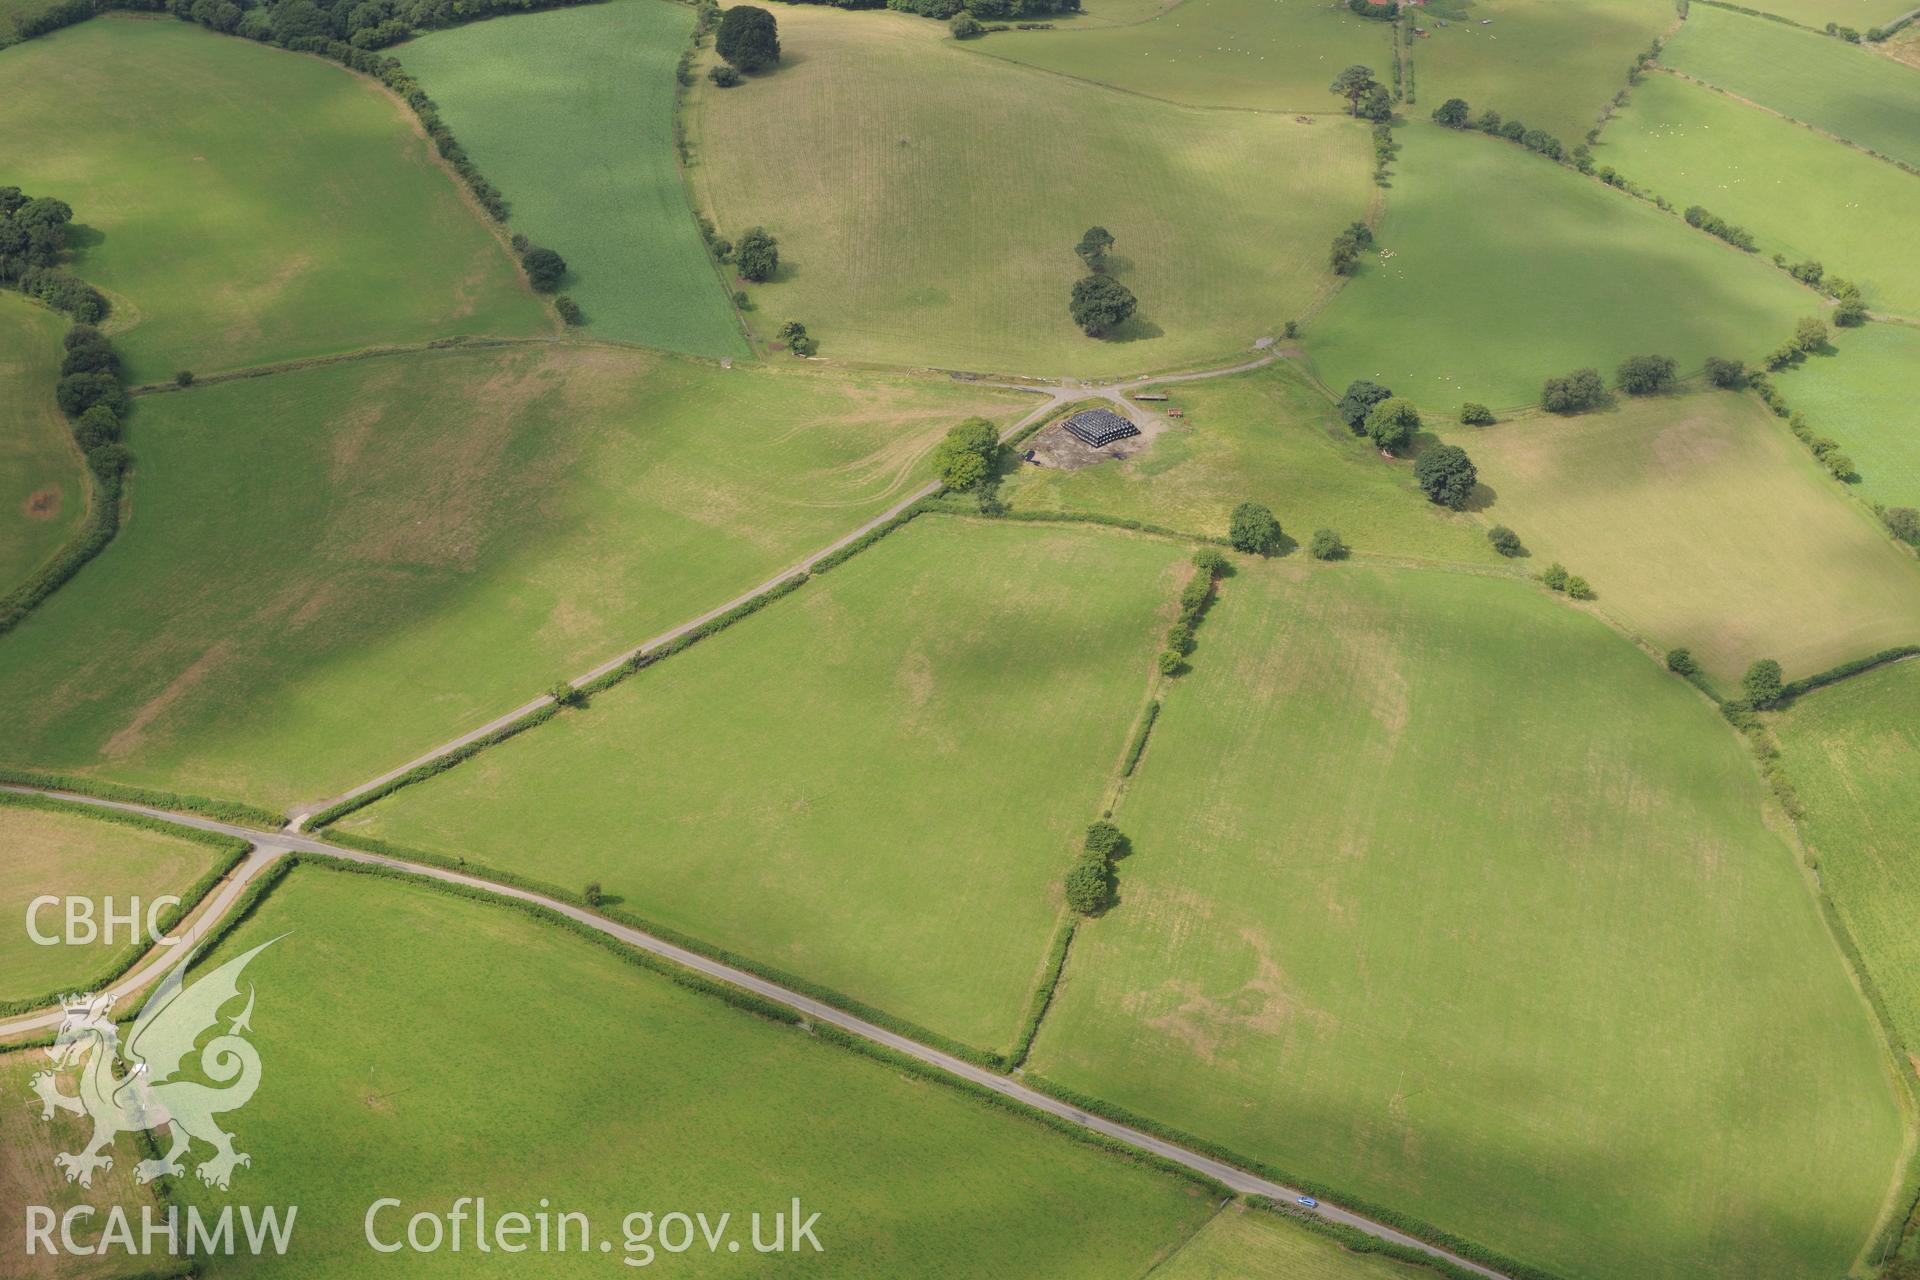 Cropmarks of Roman camp west of Caerau Roman fort and possible square ditched barrow, Beulah, west of Builth Wells. Oblique aerial photograph taken during the Royal Commission?s programme of archaeological aerial reconnaissance by Toby Driver on 1st August 2013.